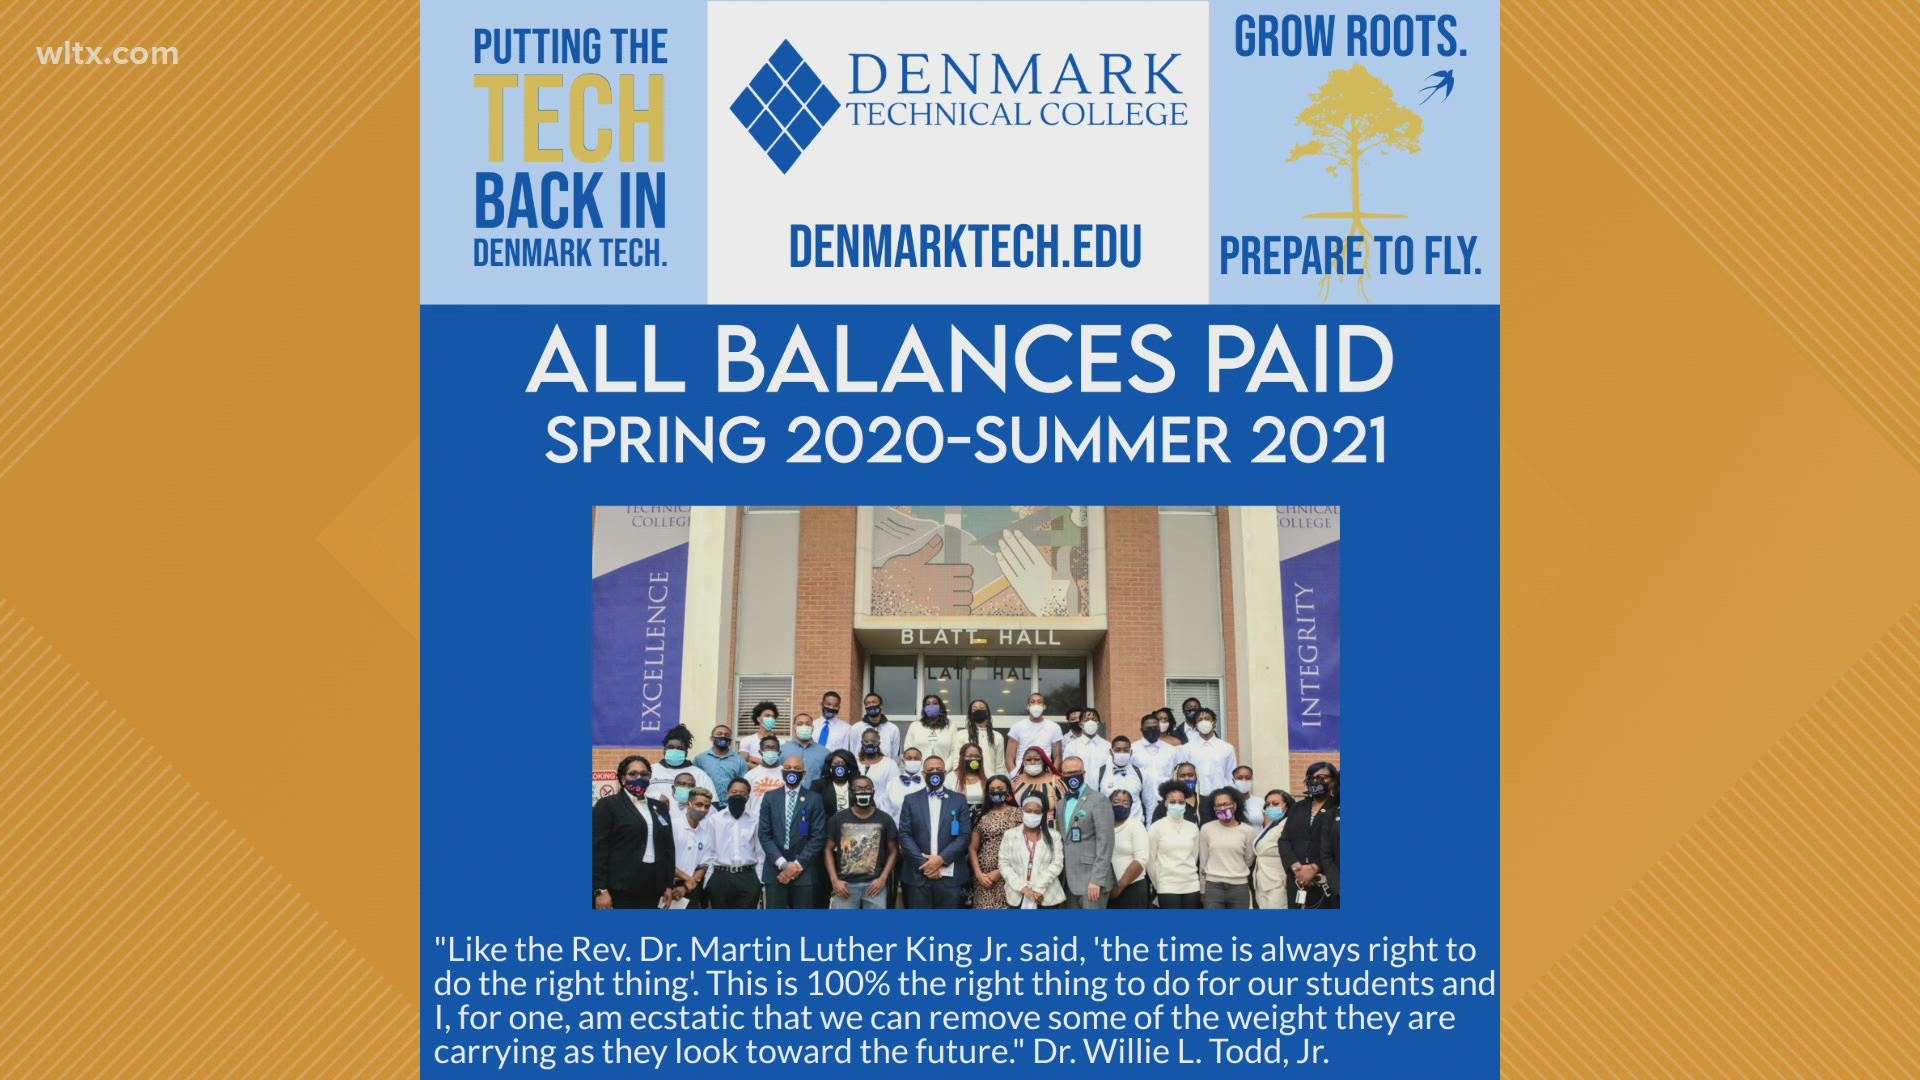 Denmark Technical College announced on Friday that they were making the big move.